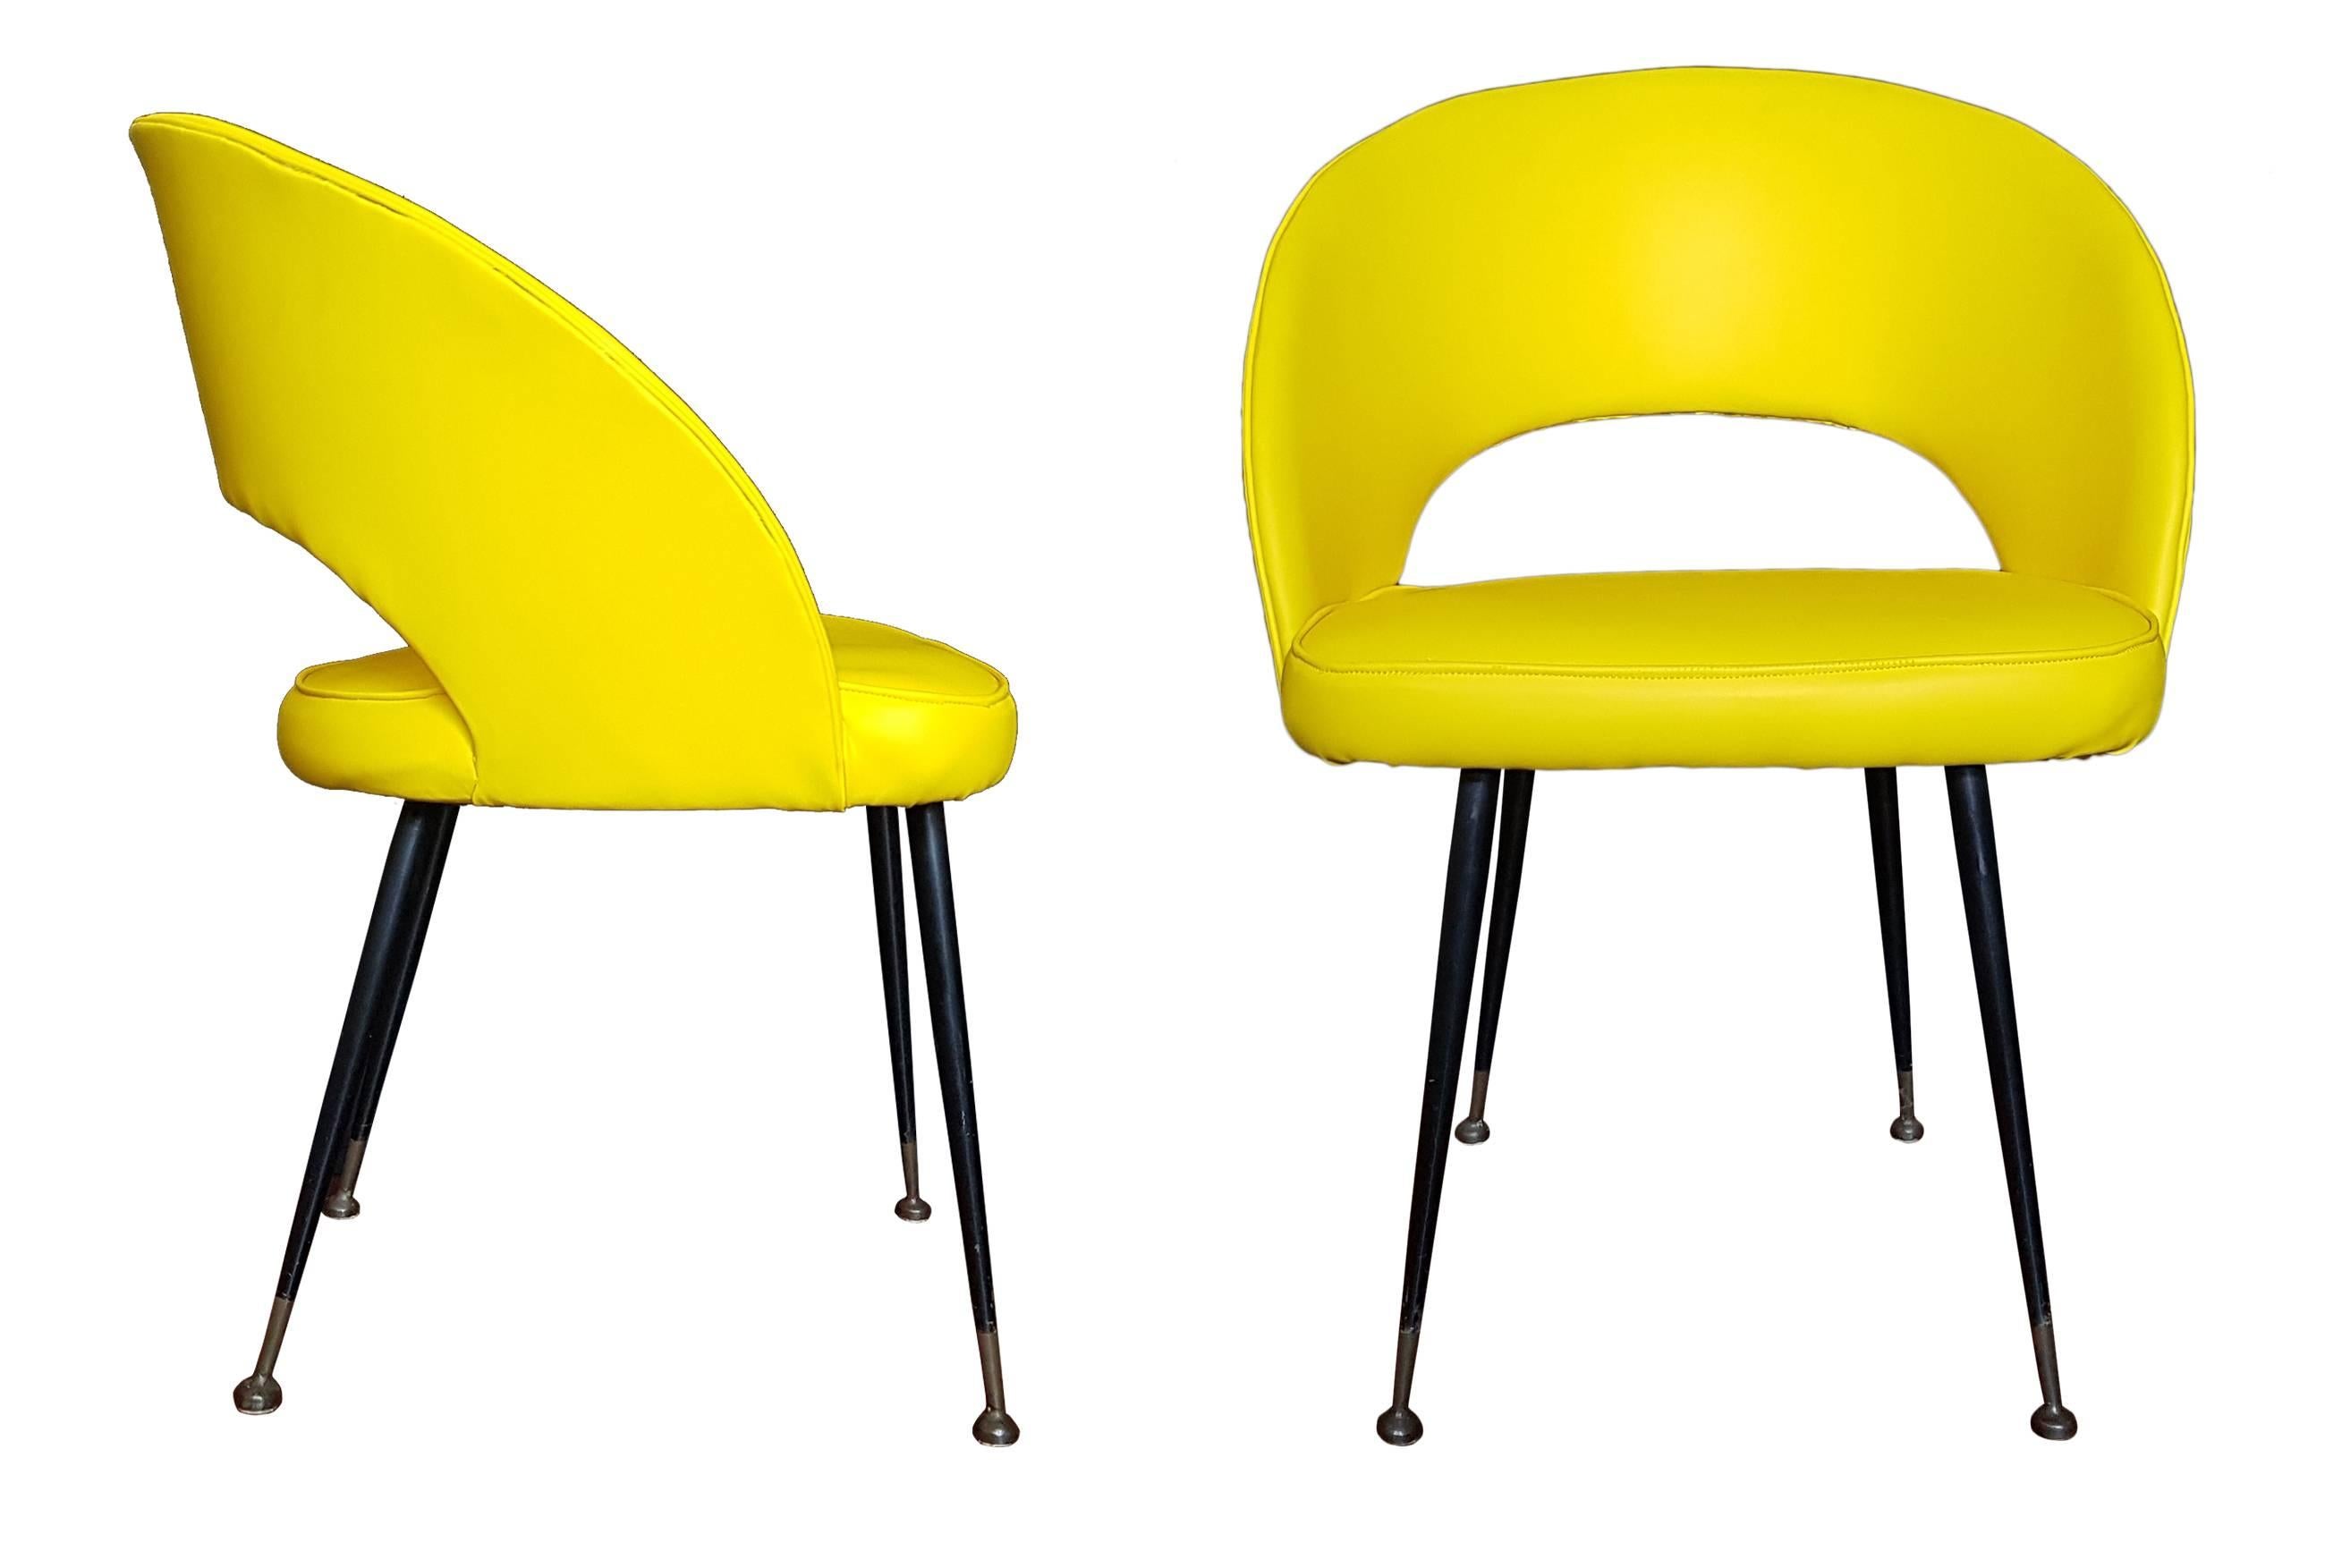 Couple of armchairs upholstered in yellow leatherette, legs of brass and steel tubs.
Manufactured in the 1950s.